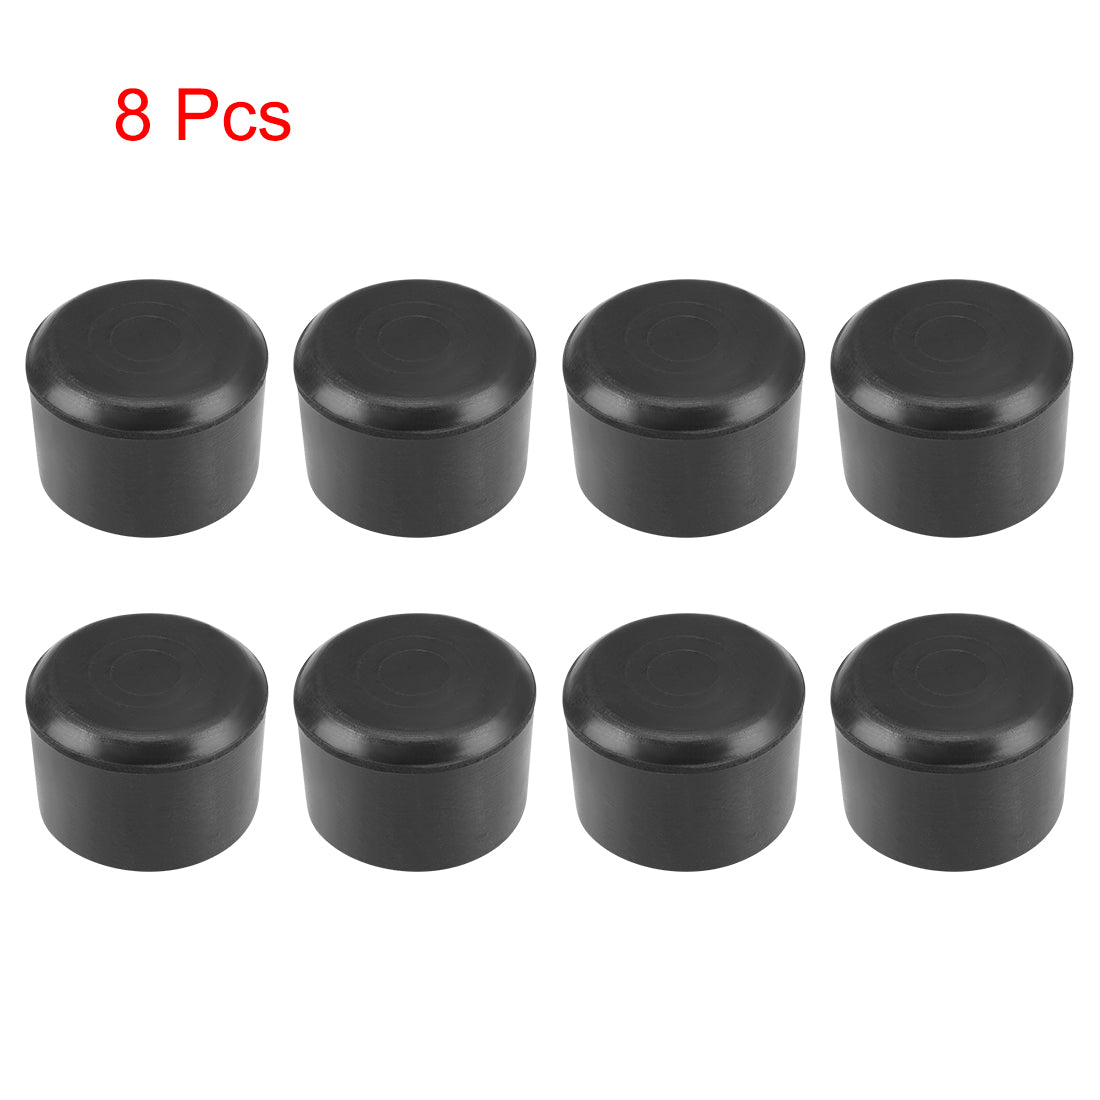 uxcell Uxcell Rubber Furniture Caps 32mm Inner Diameter Round Table Chair Legs Covers 8Pcs